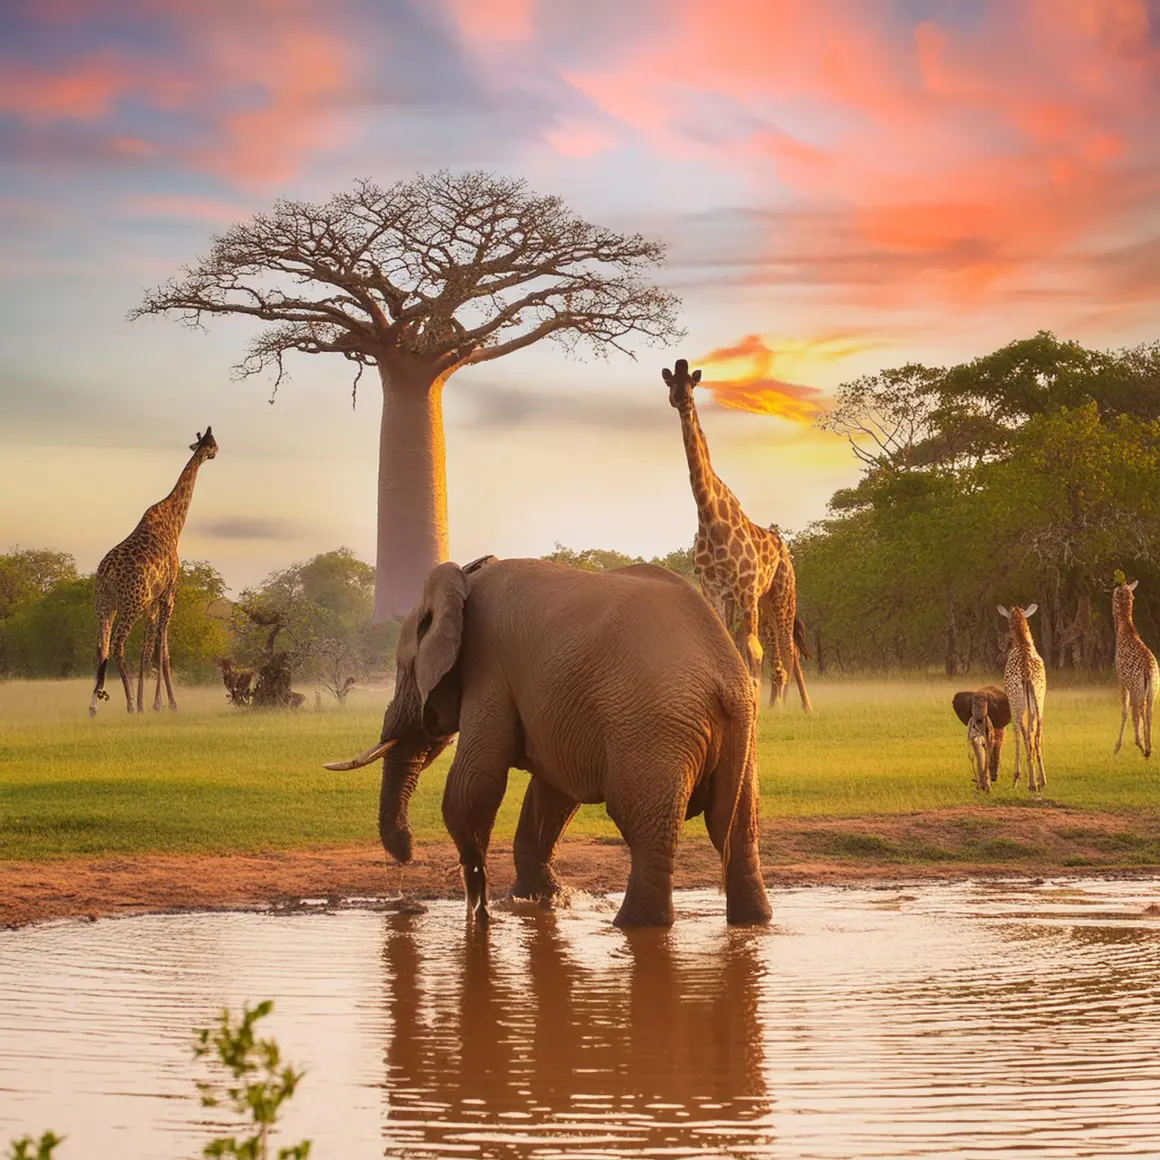 Style Reference original image amazonian forest elephant drinking water with giraffes 1160x1160 jpg